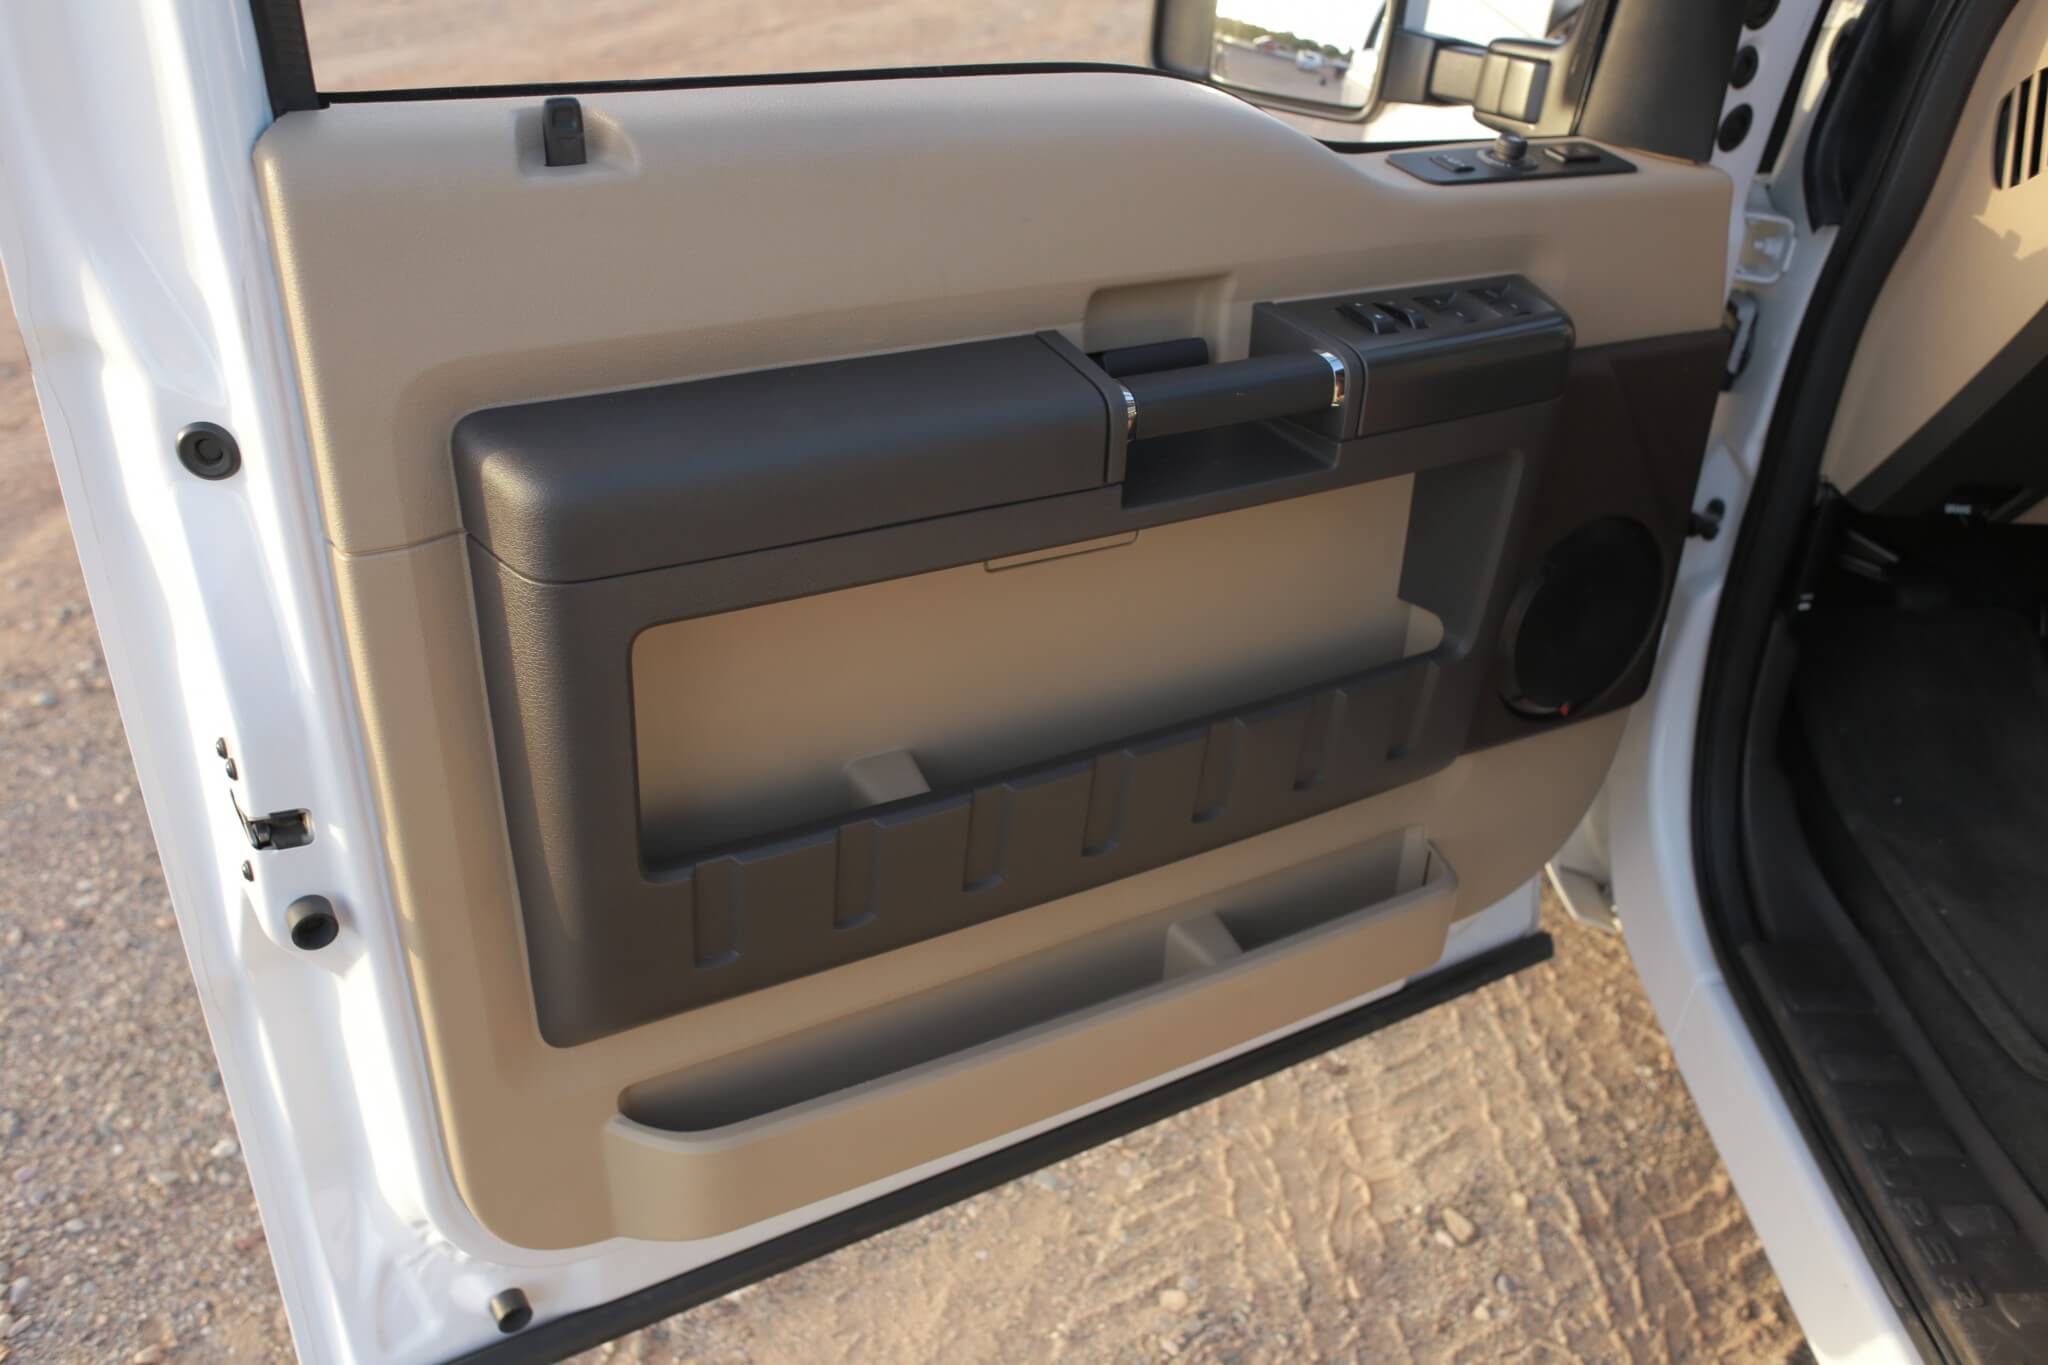 The door panels were fitted with Rockford Fosgate speakers to enhance the quality of the mobile entertainment.